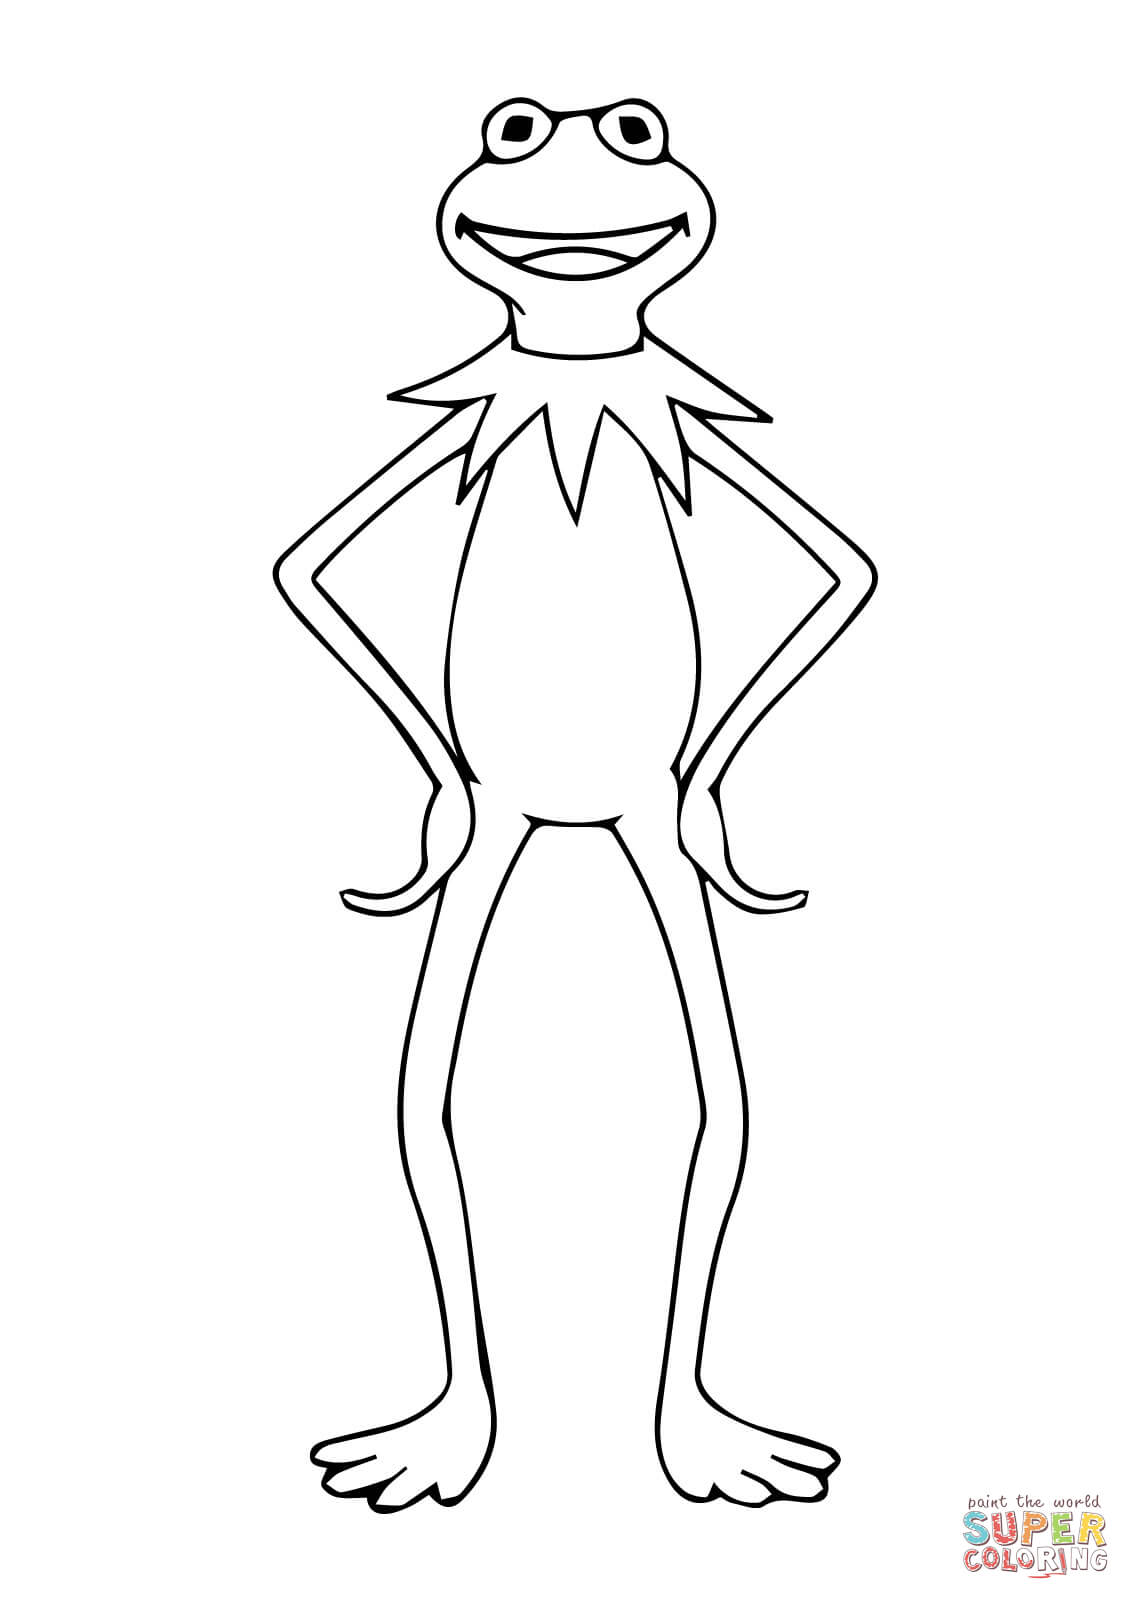 Kermit the Frog Is Standing coloring page | Free Printable